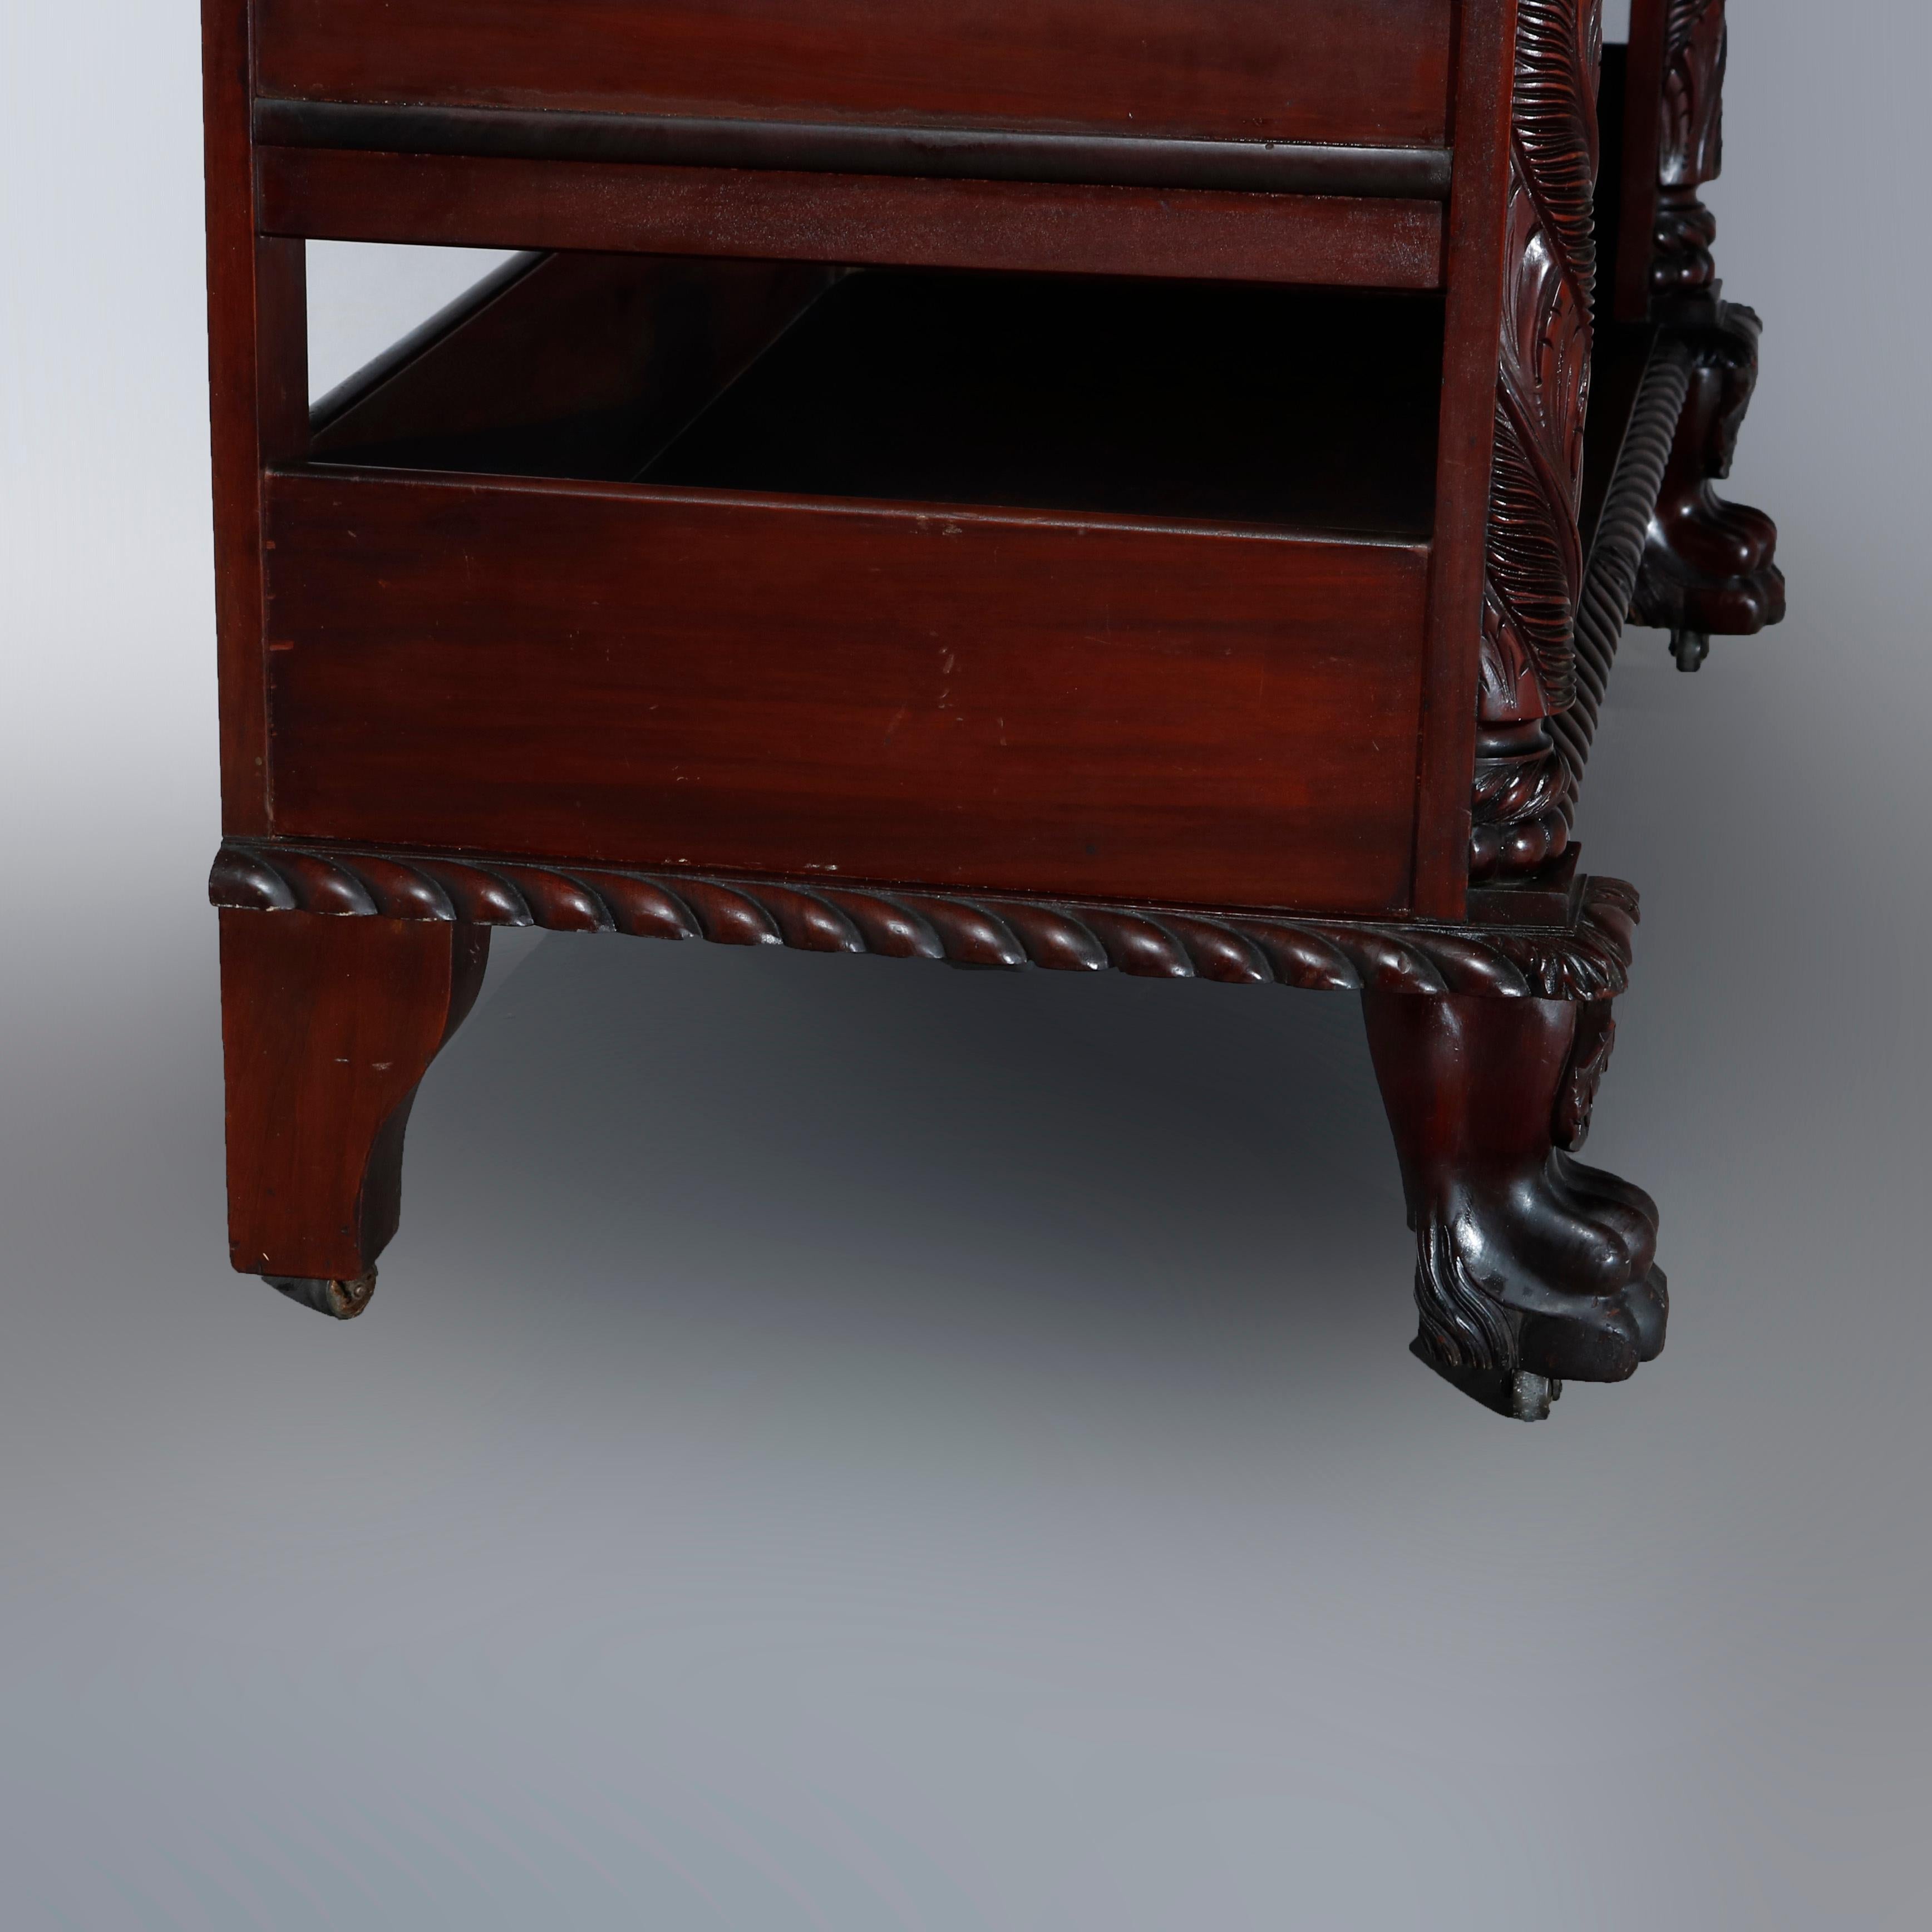 20th Century Antique Second Empire Deeply Carved Flame Mahogany Server, circa 1900 For Sale